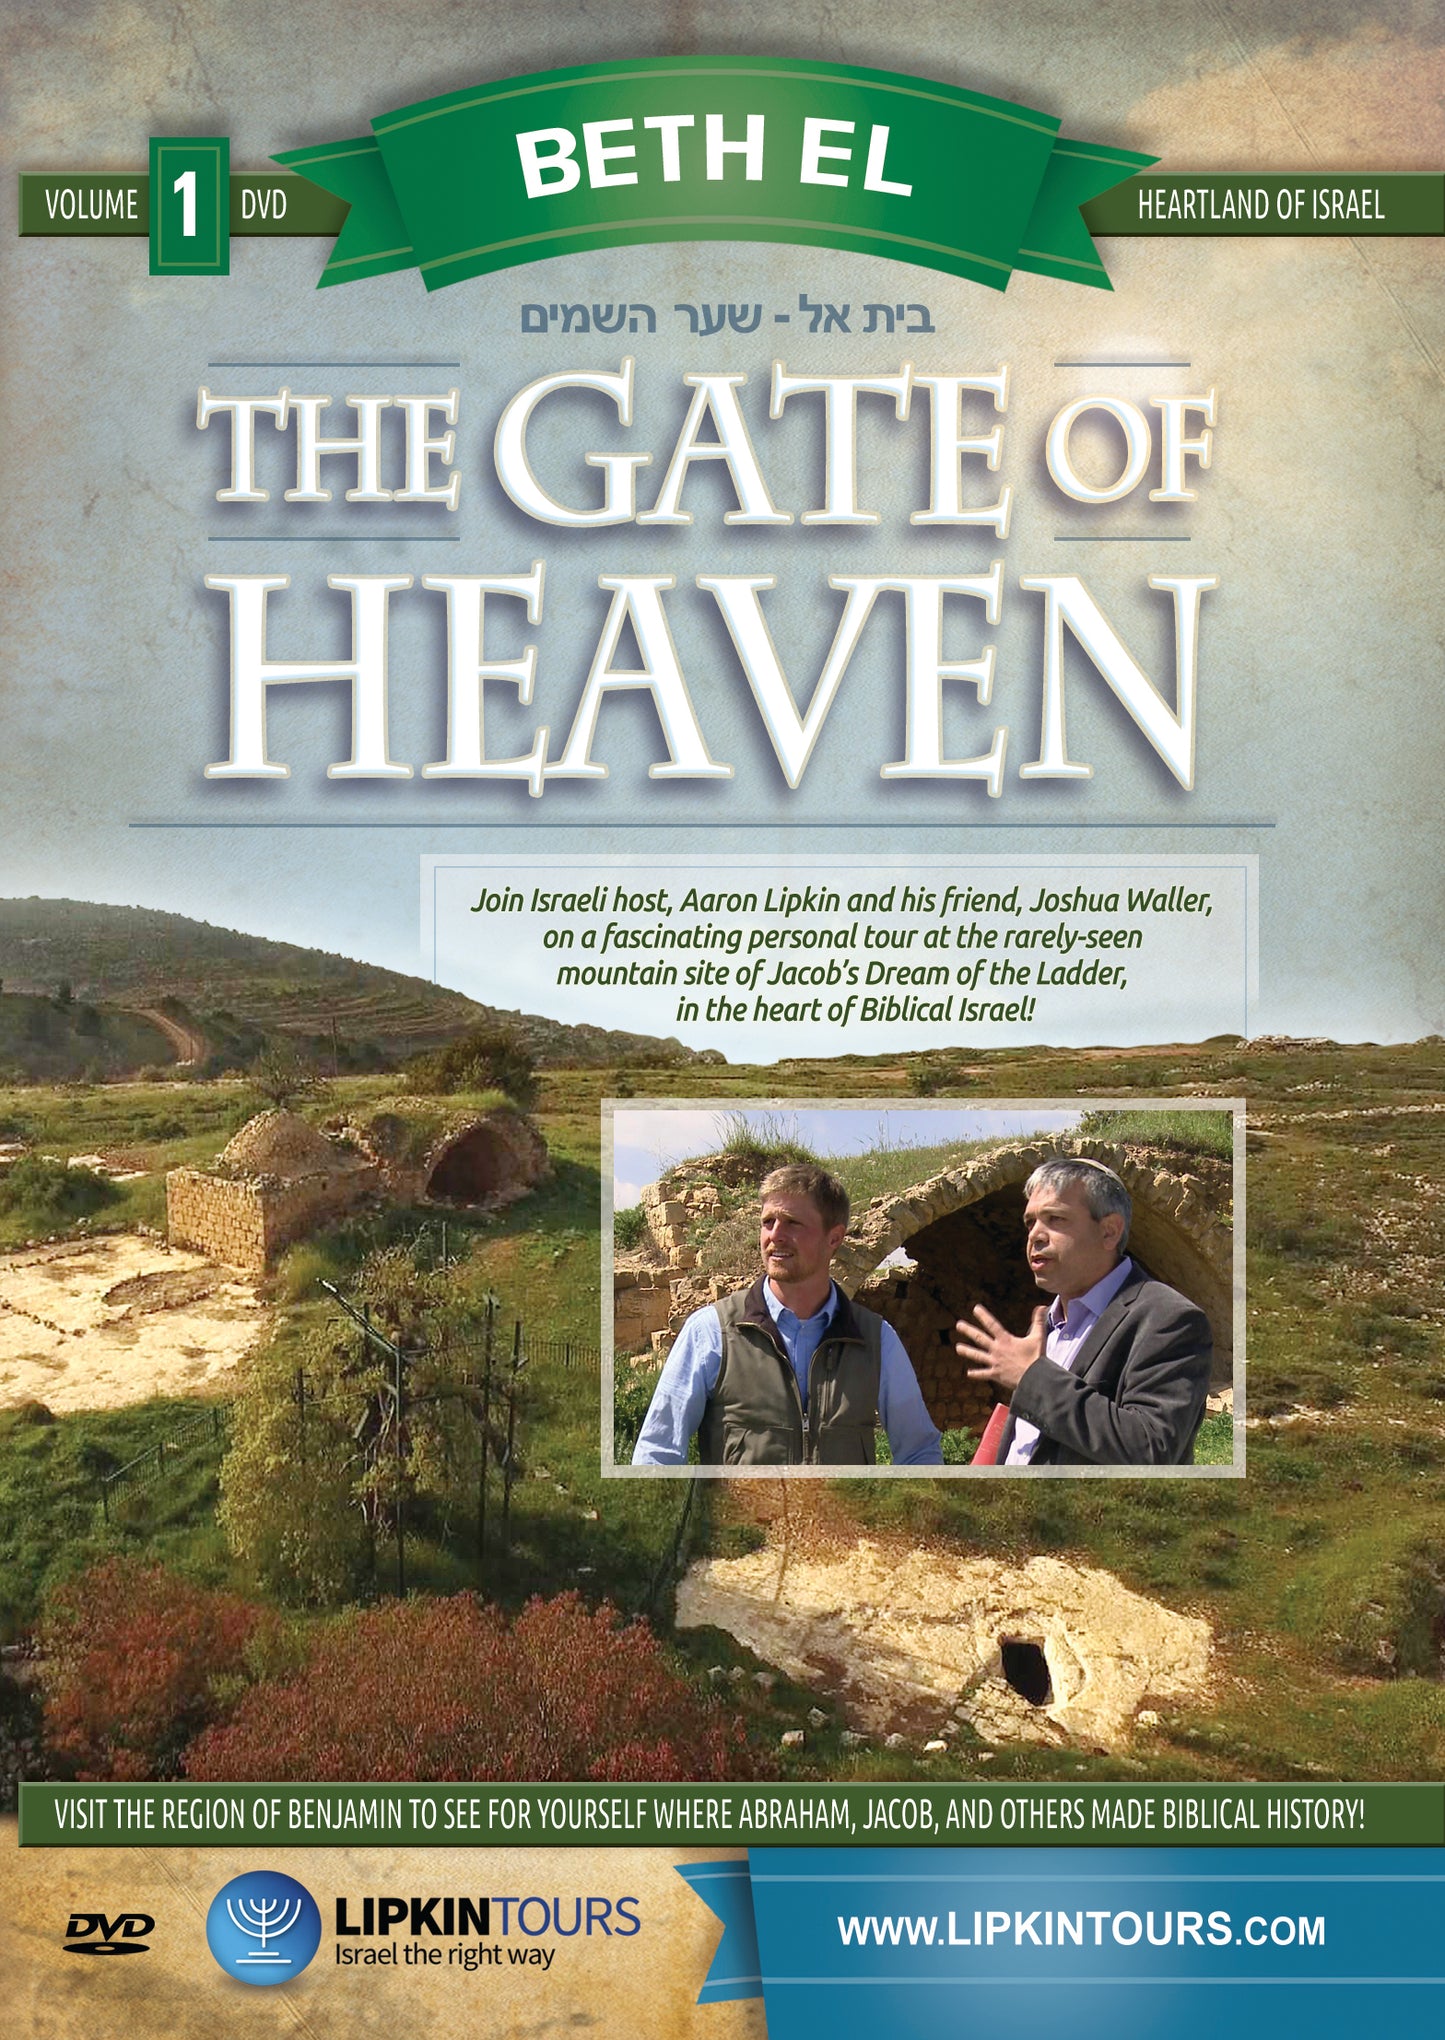 The Gate of Heaven - Discovering Bethel